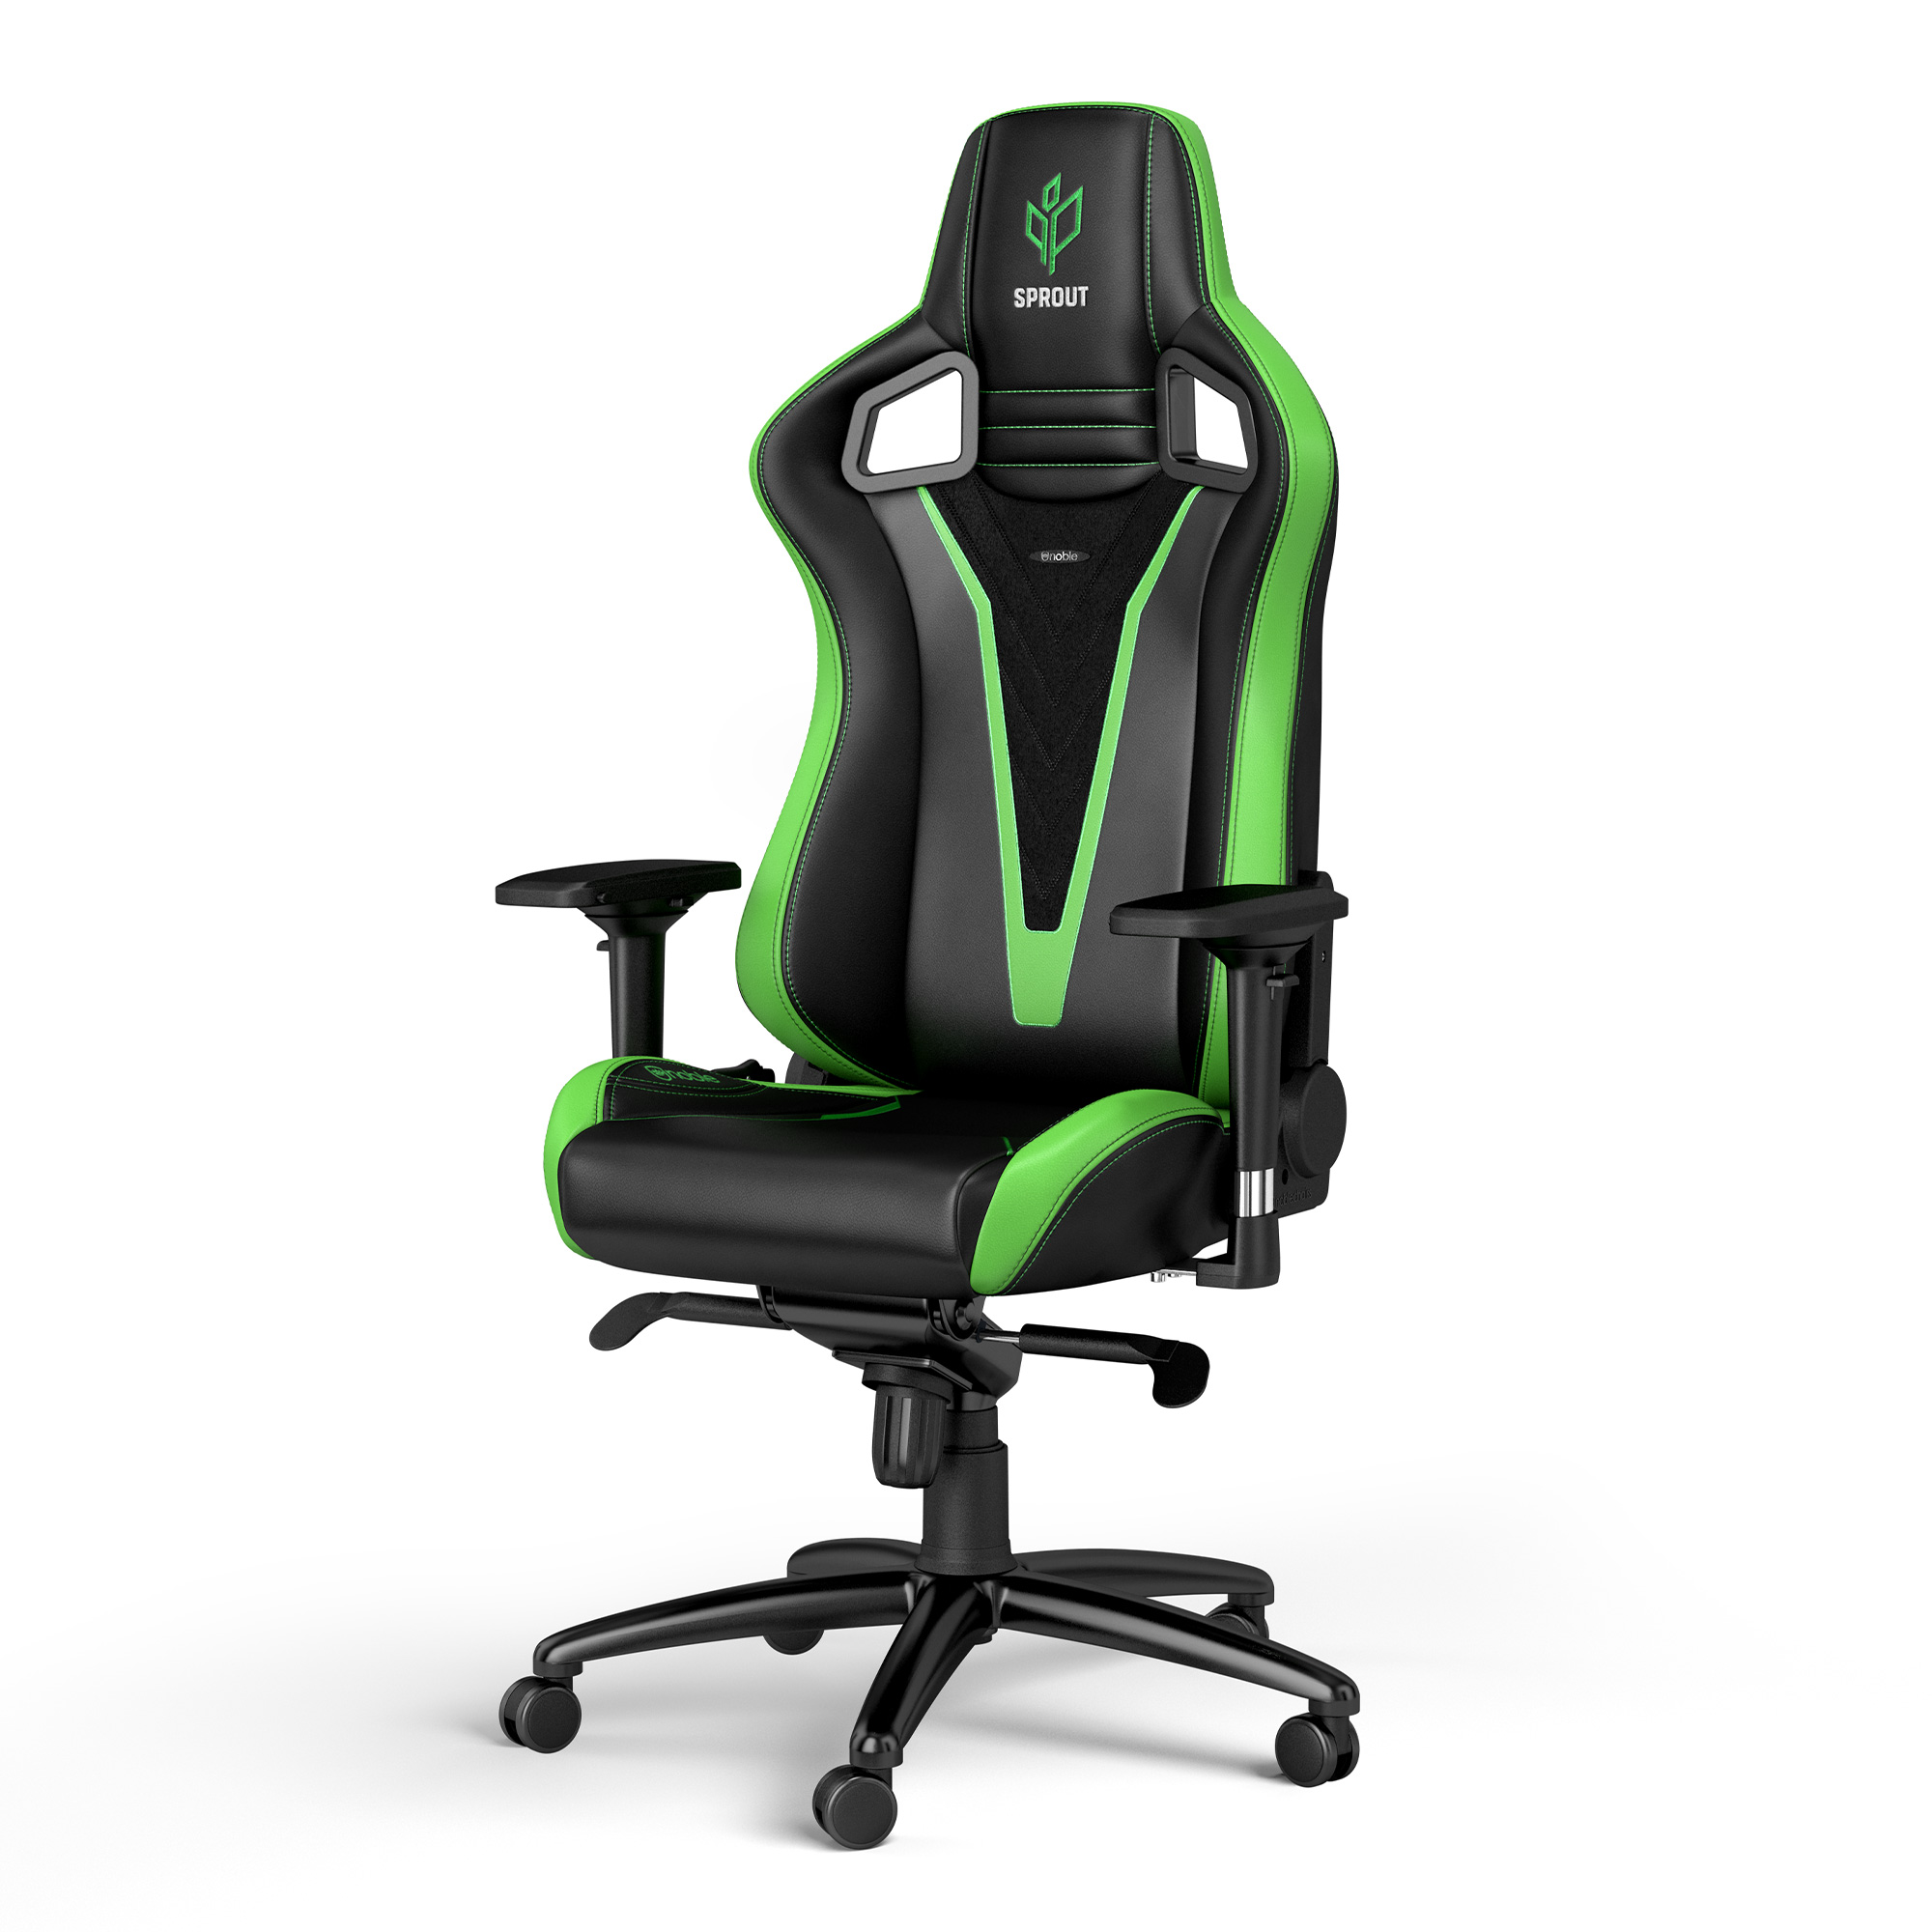 noblechairs - noblechairs EPIC Gaming Chair - Sprout Edition